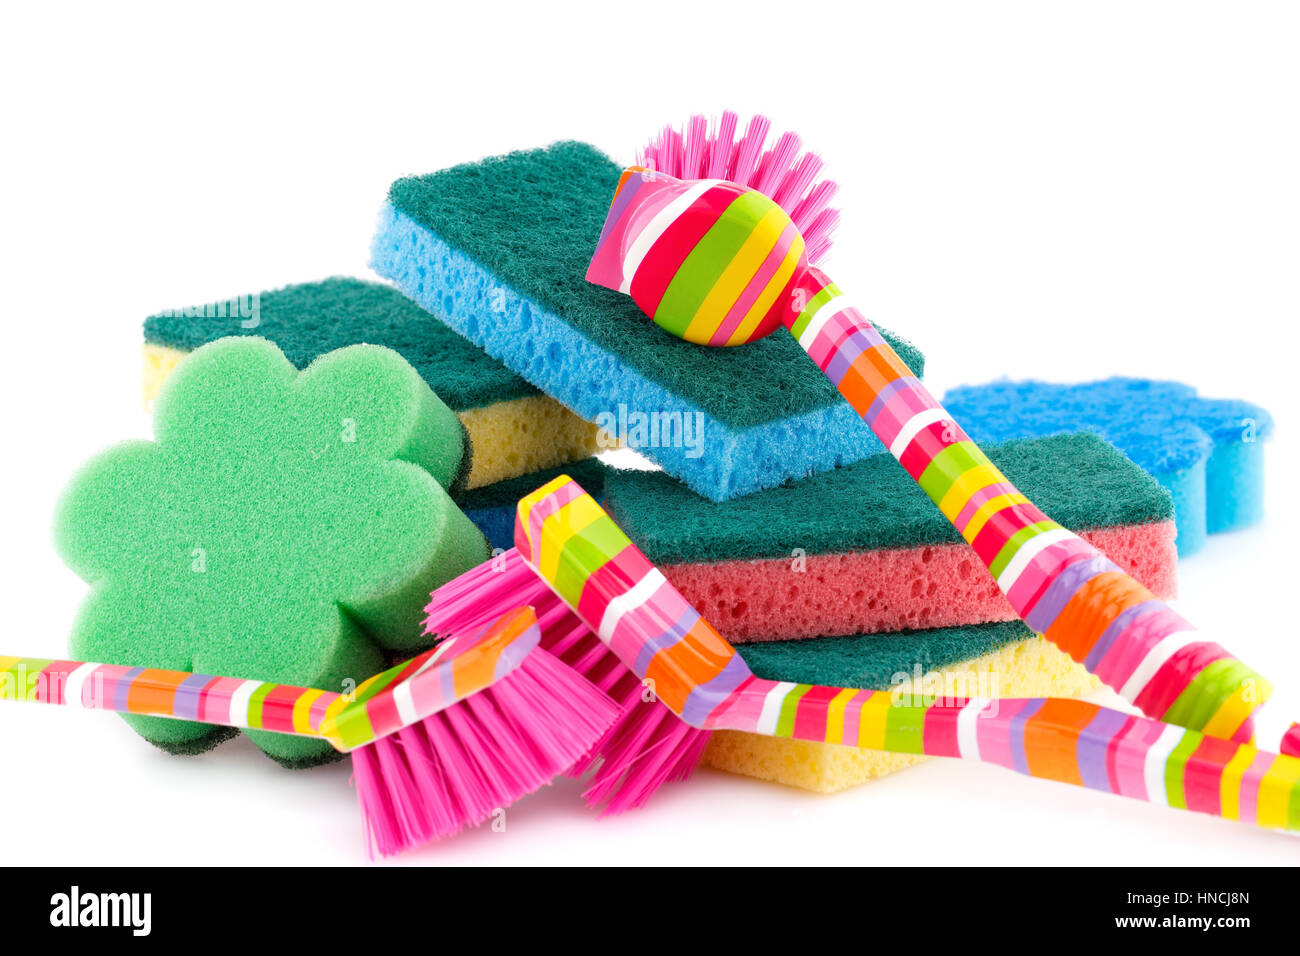 Colorful sponges and brushes isolated on white background. Stock Photo